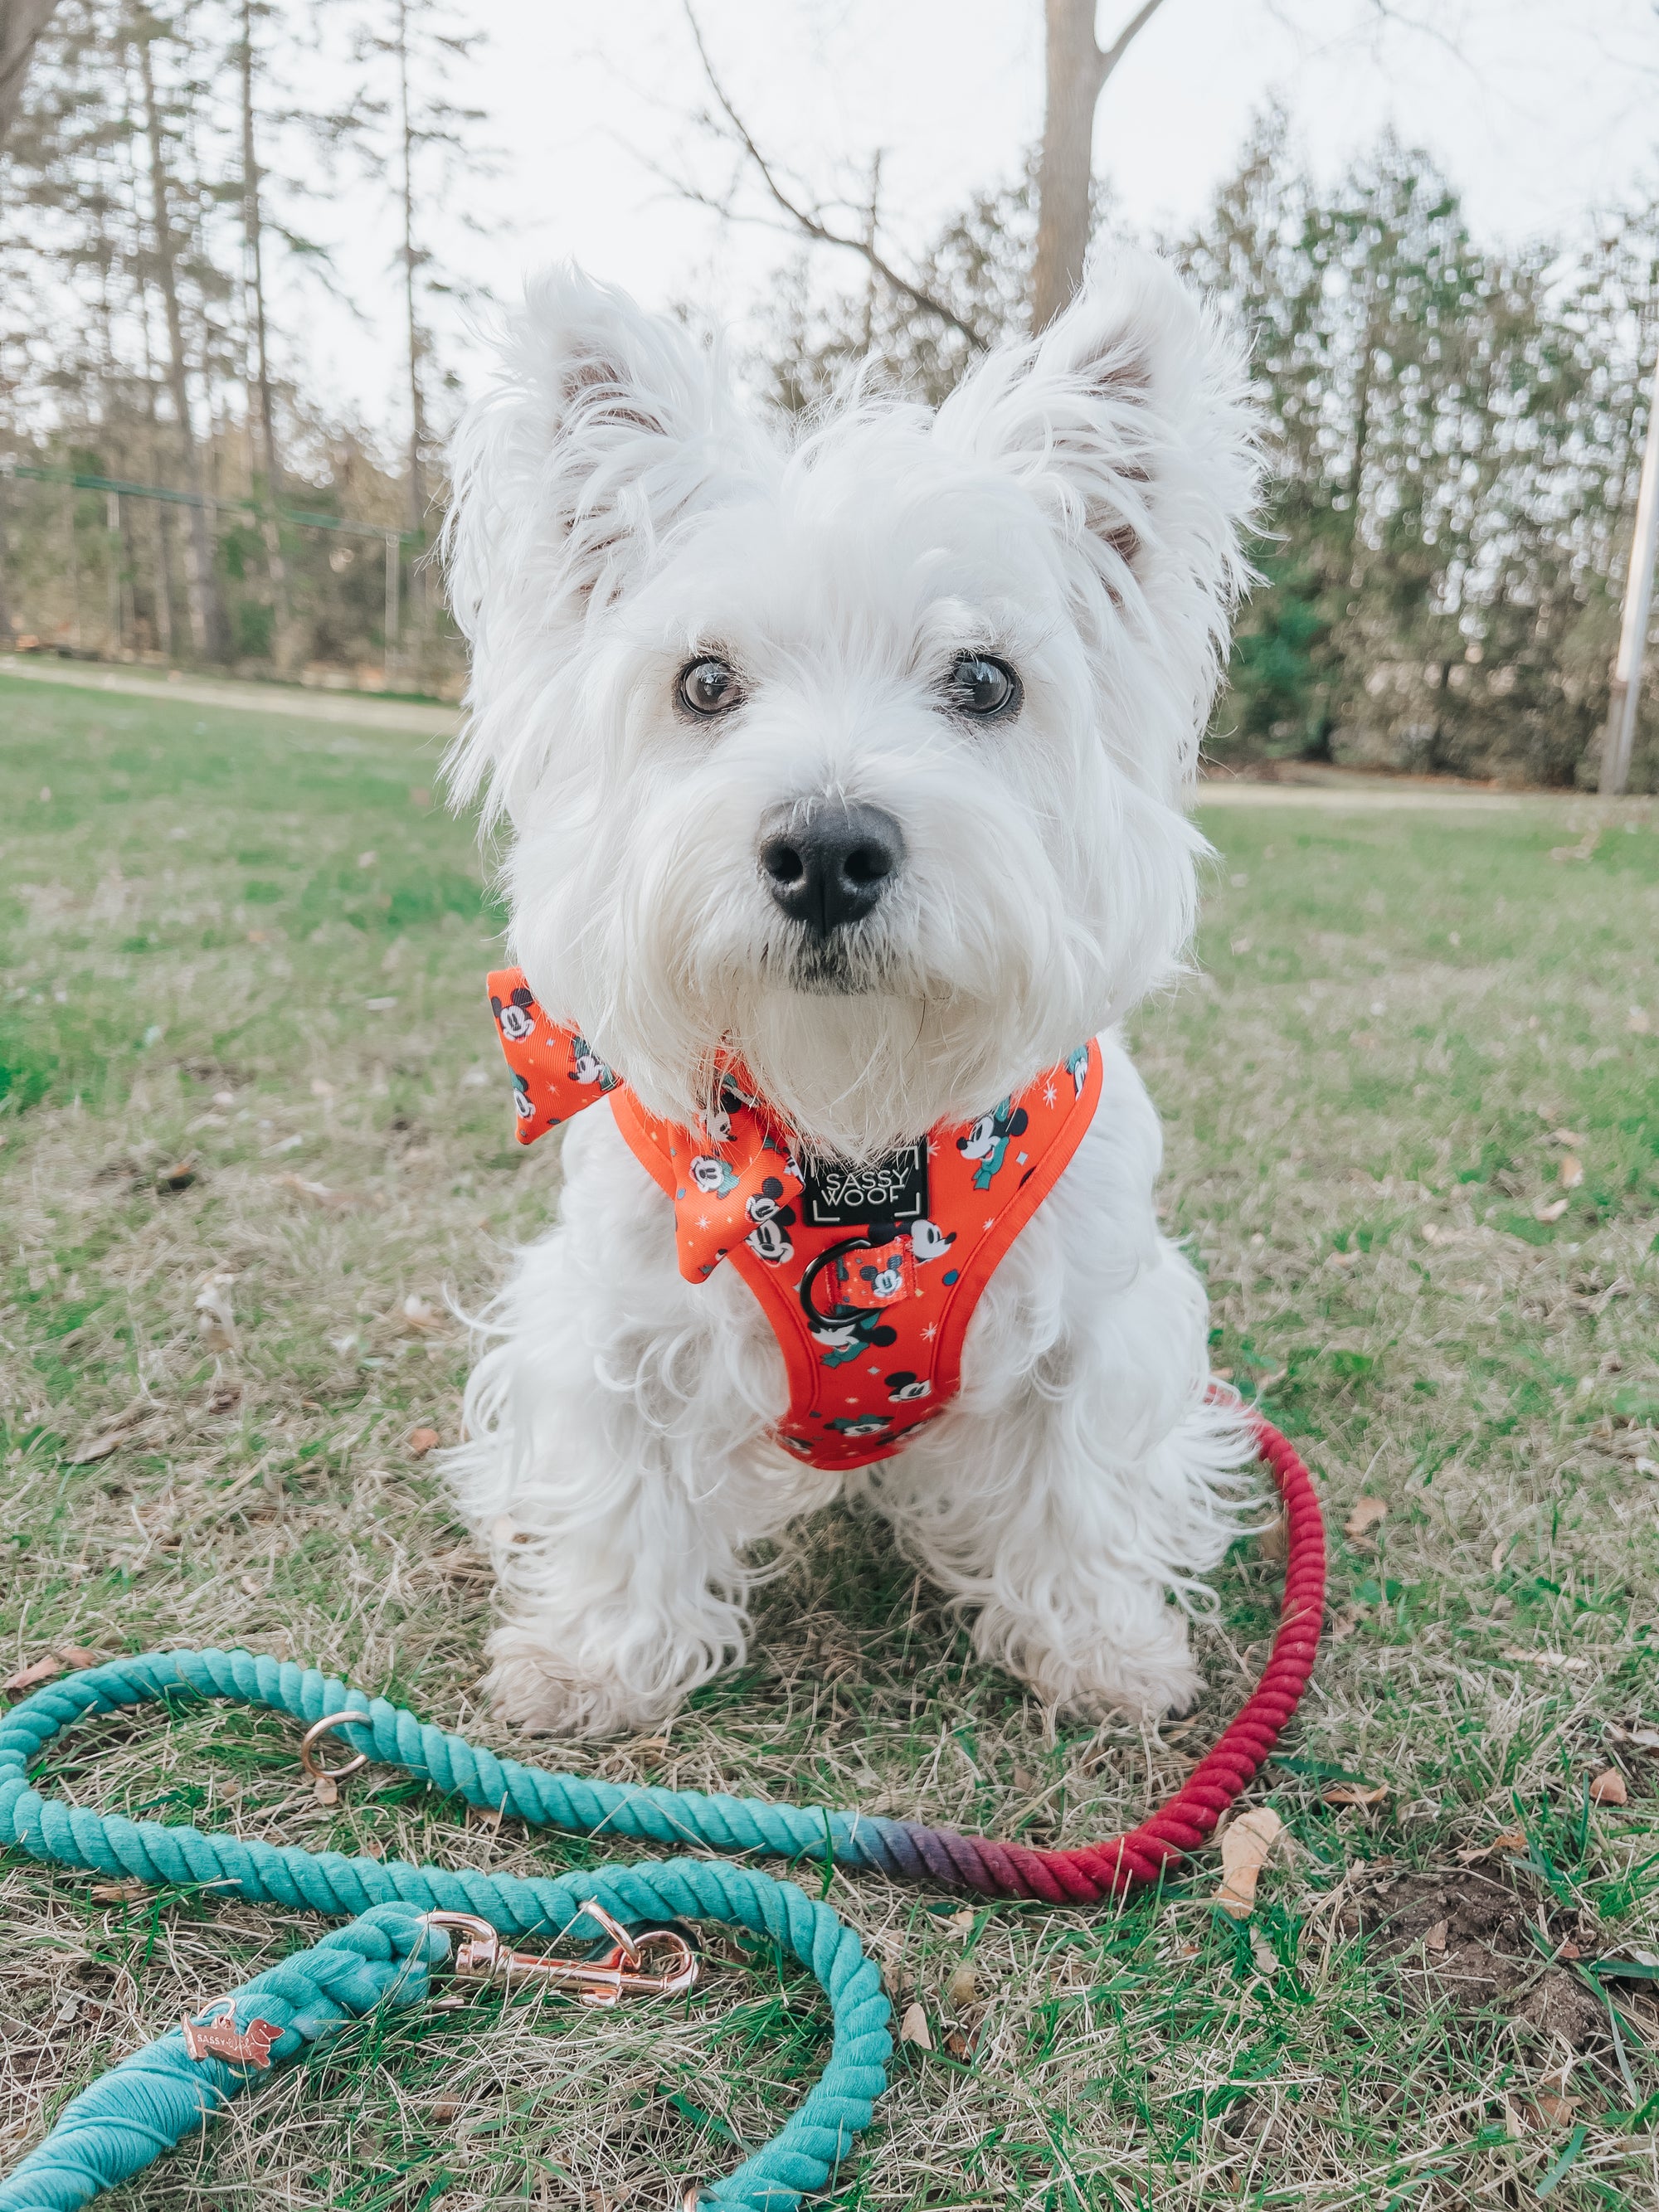 INFLUENCER_CONTENT | @LACEY.THE.WESTIE